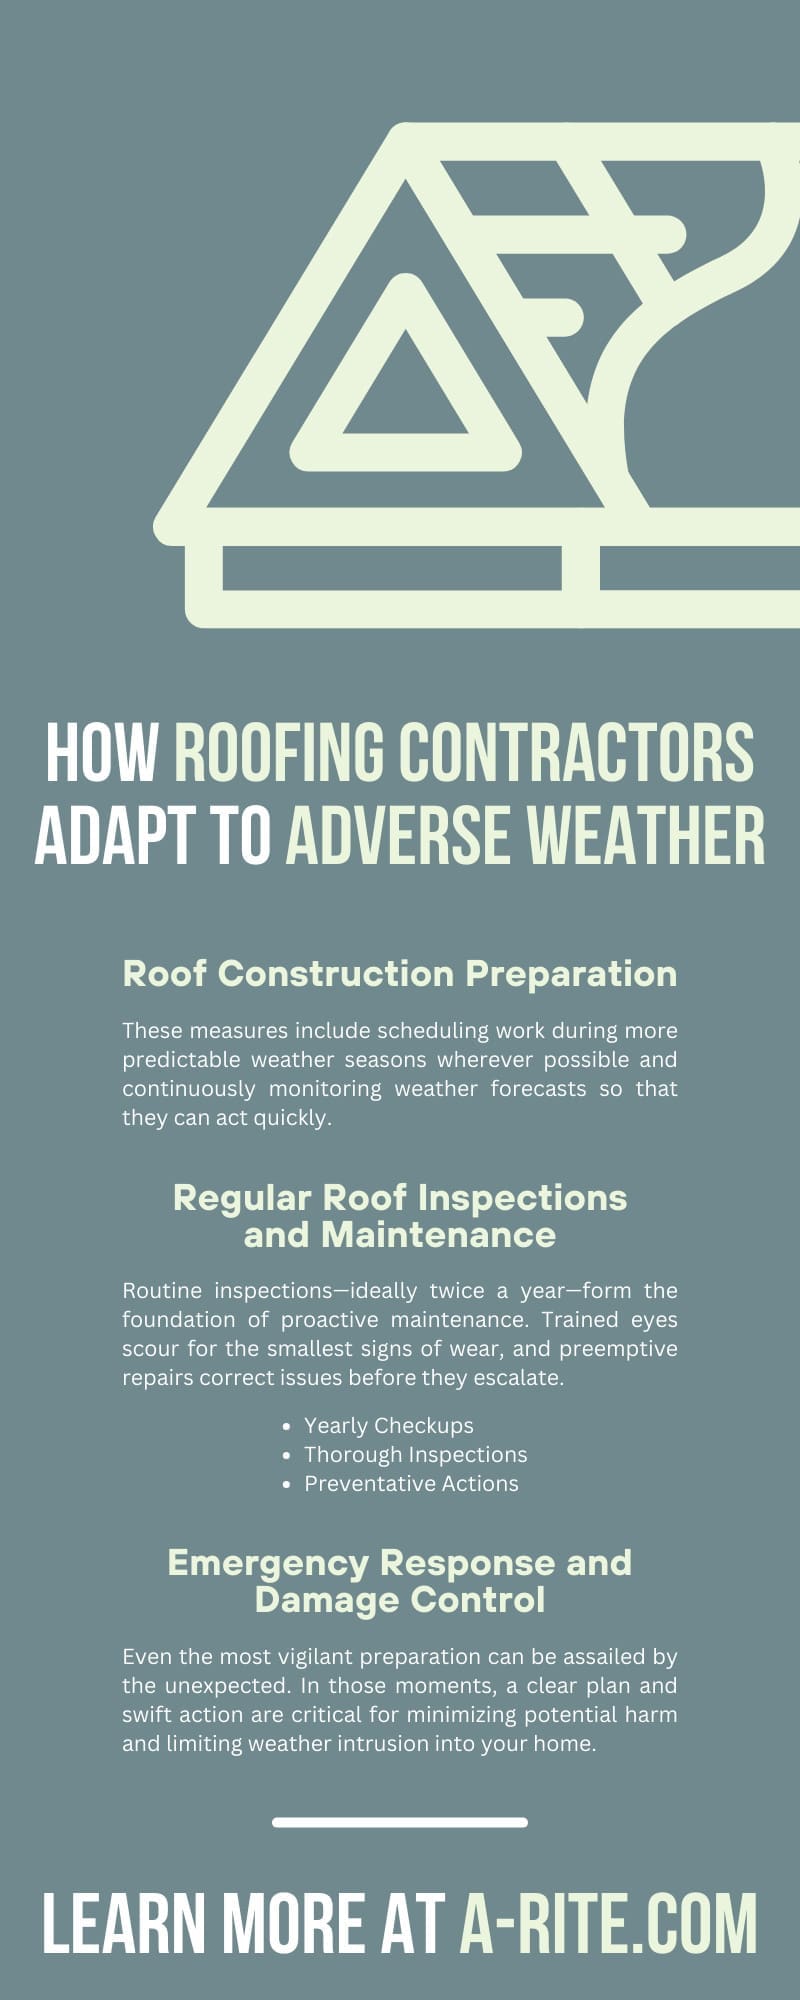 How Roofing Contractors Adapt to Adverse Weather